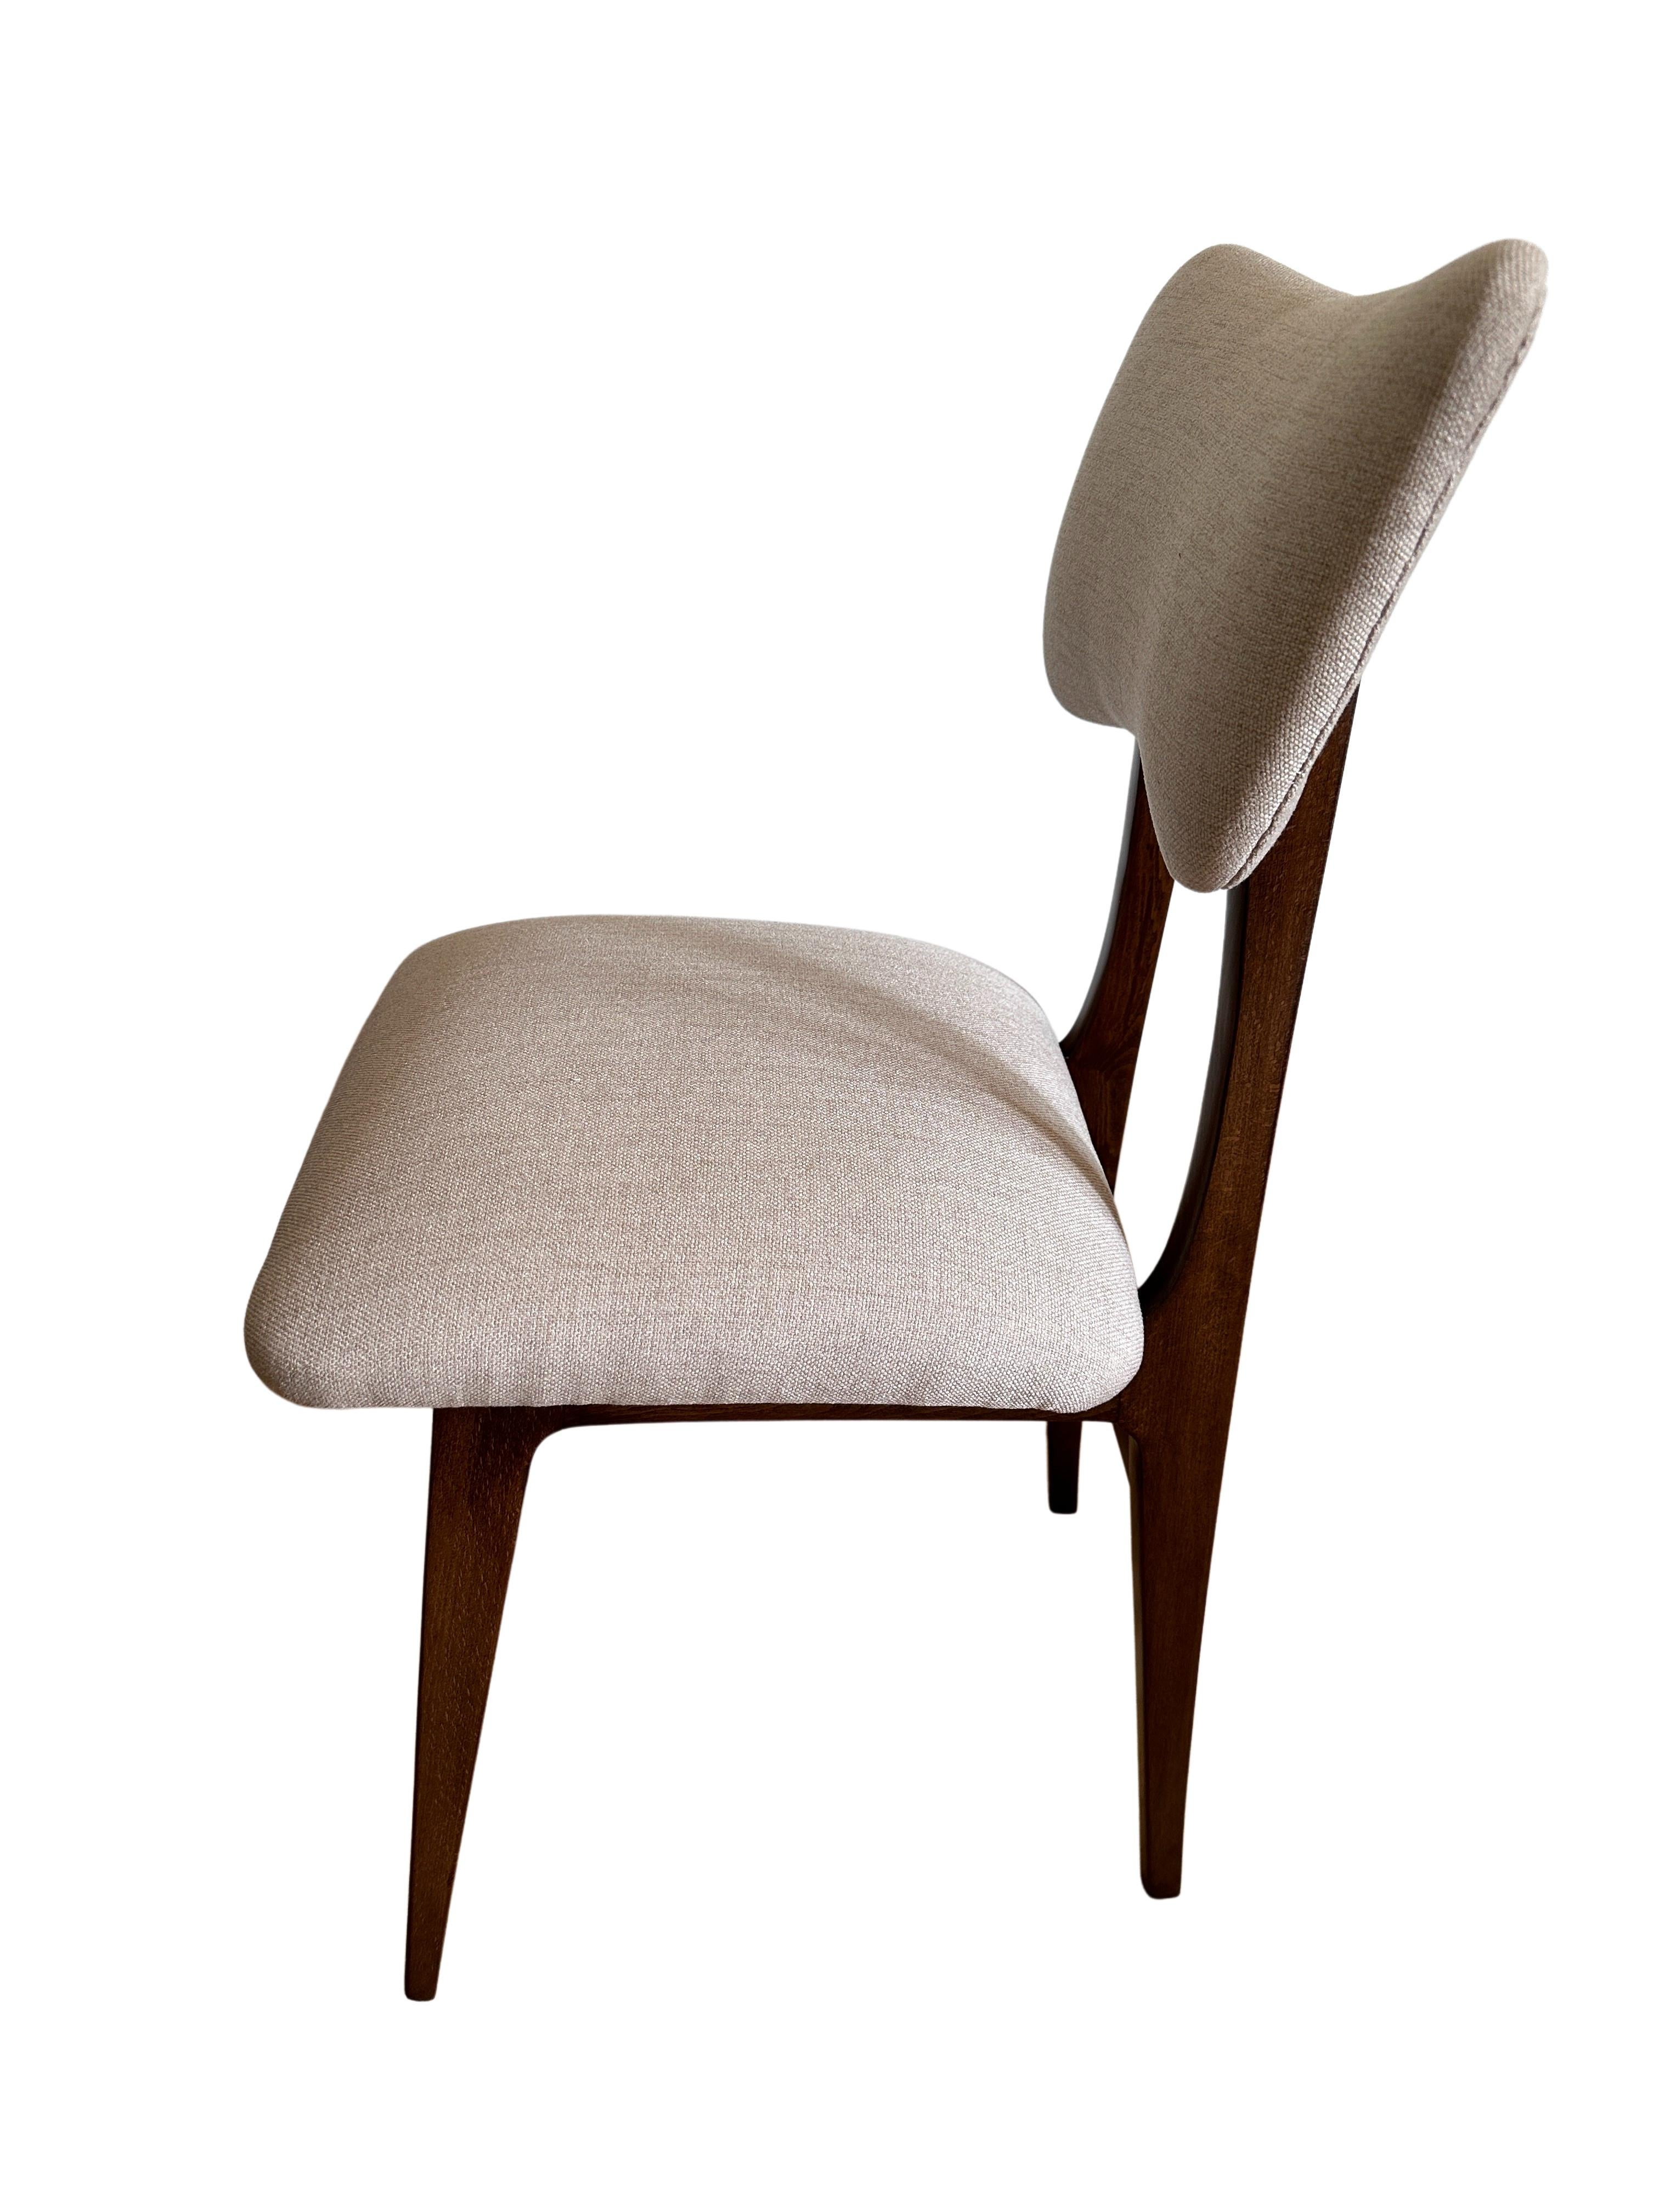 20th Century Set of 6 Midcentury Beige and Grey Dining Chairs, Europe, 1960s For Sale